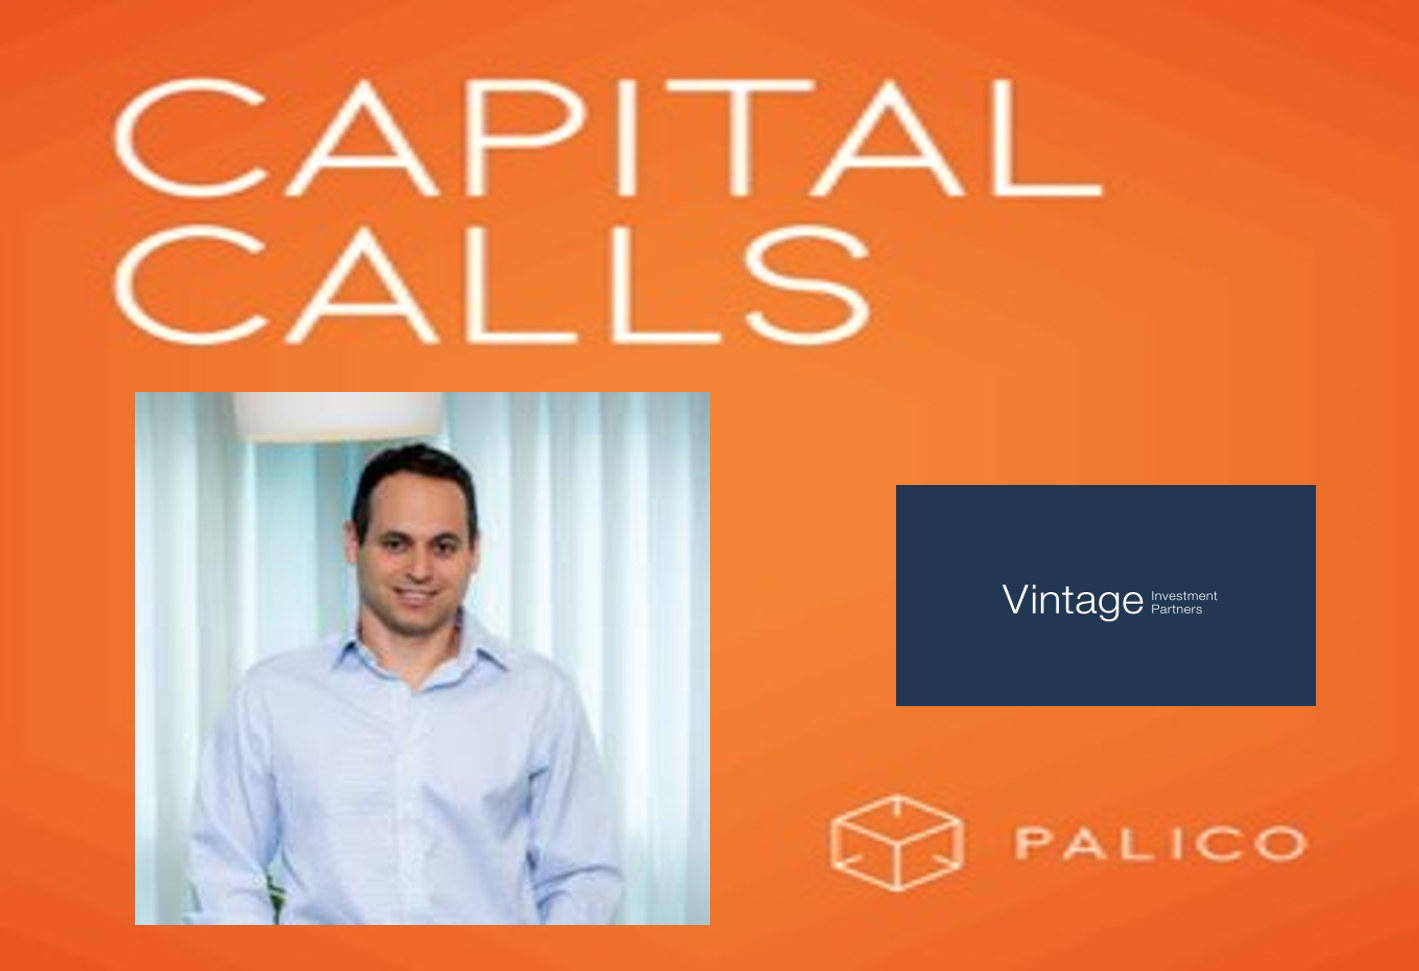 Asaf Horesh, GP of Vintage Investment Partners, joins as guest speaker on the Capital Calls podcast